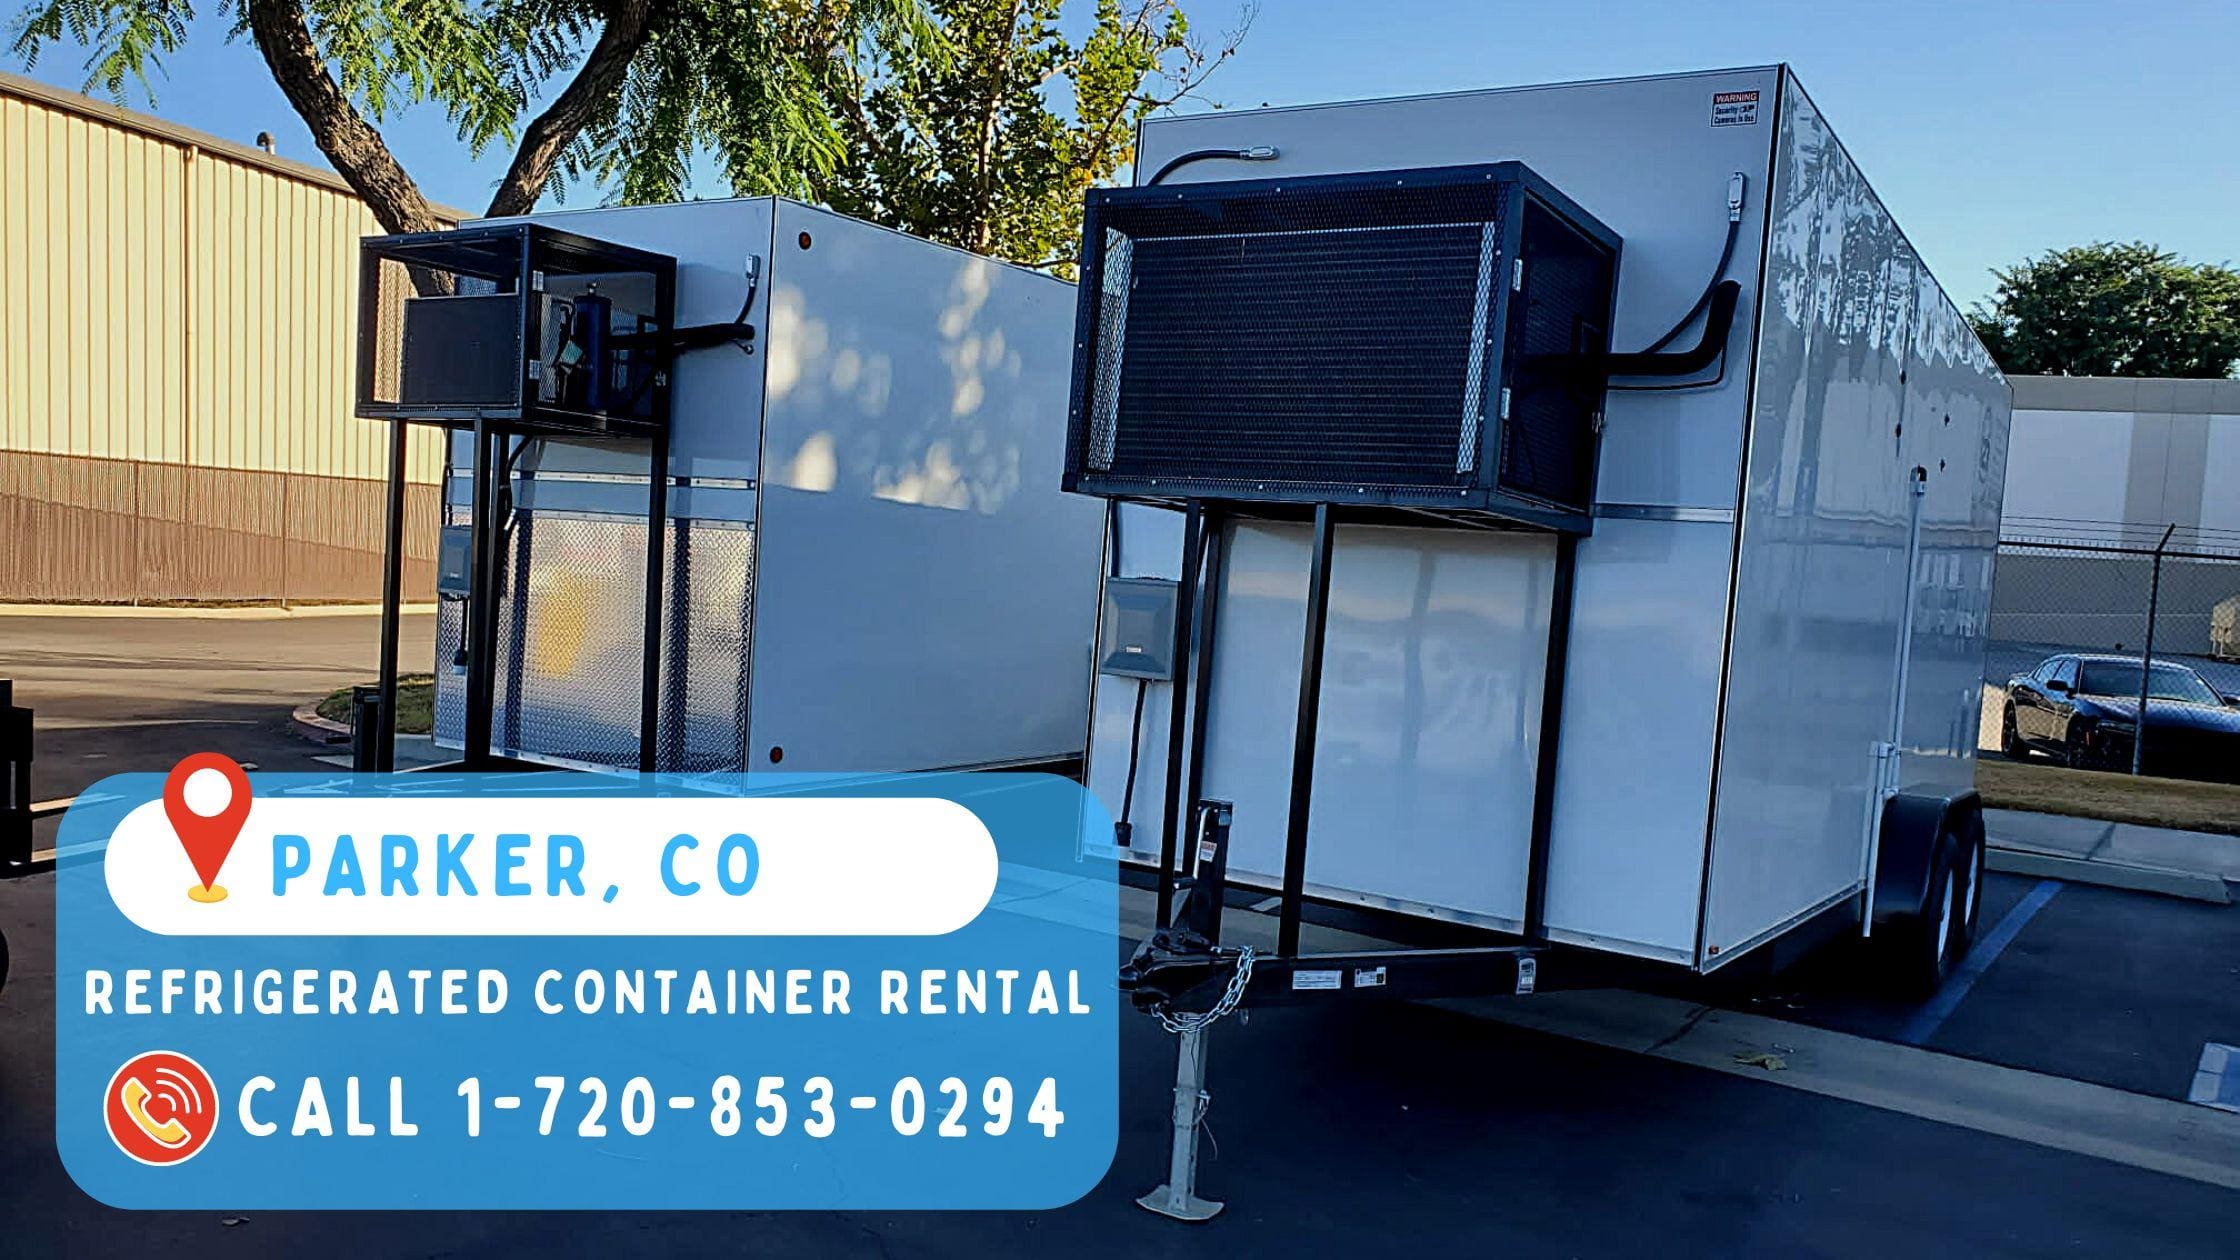 Refrigerated Container Rental in Parker